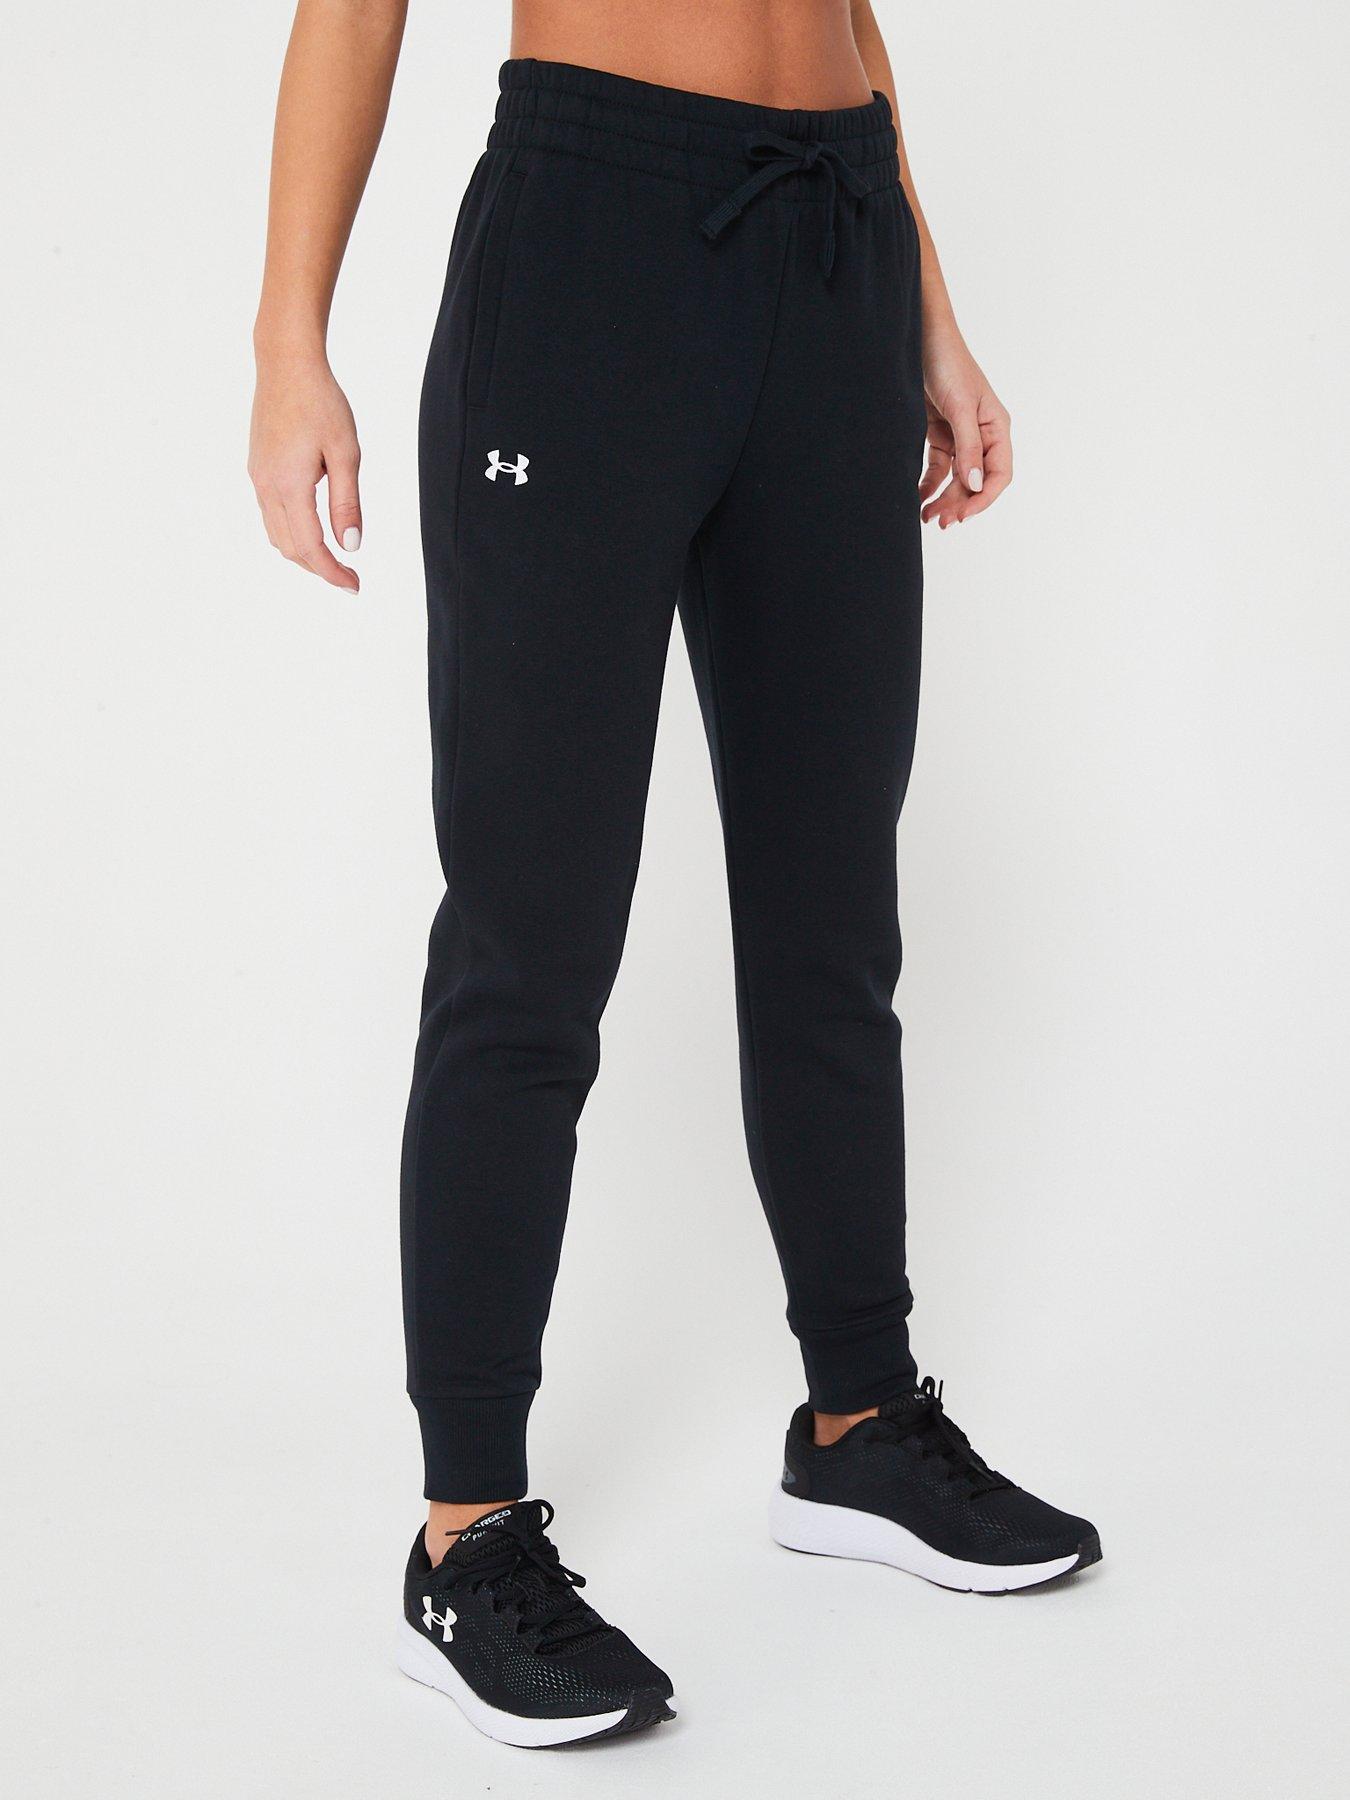 Under Armour Women's Armour Fleece Joggers - Women's training and